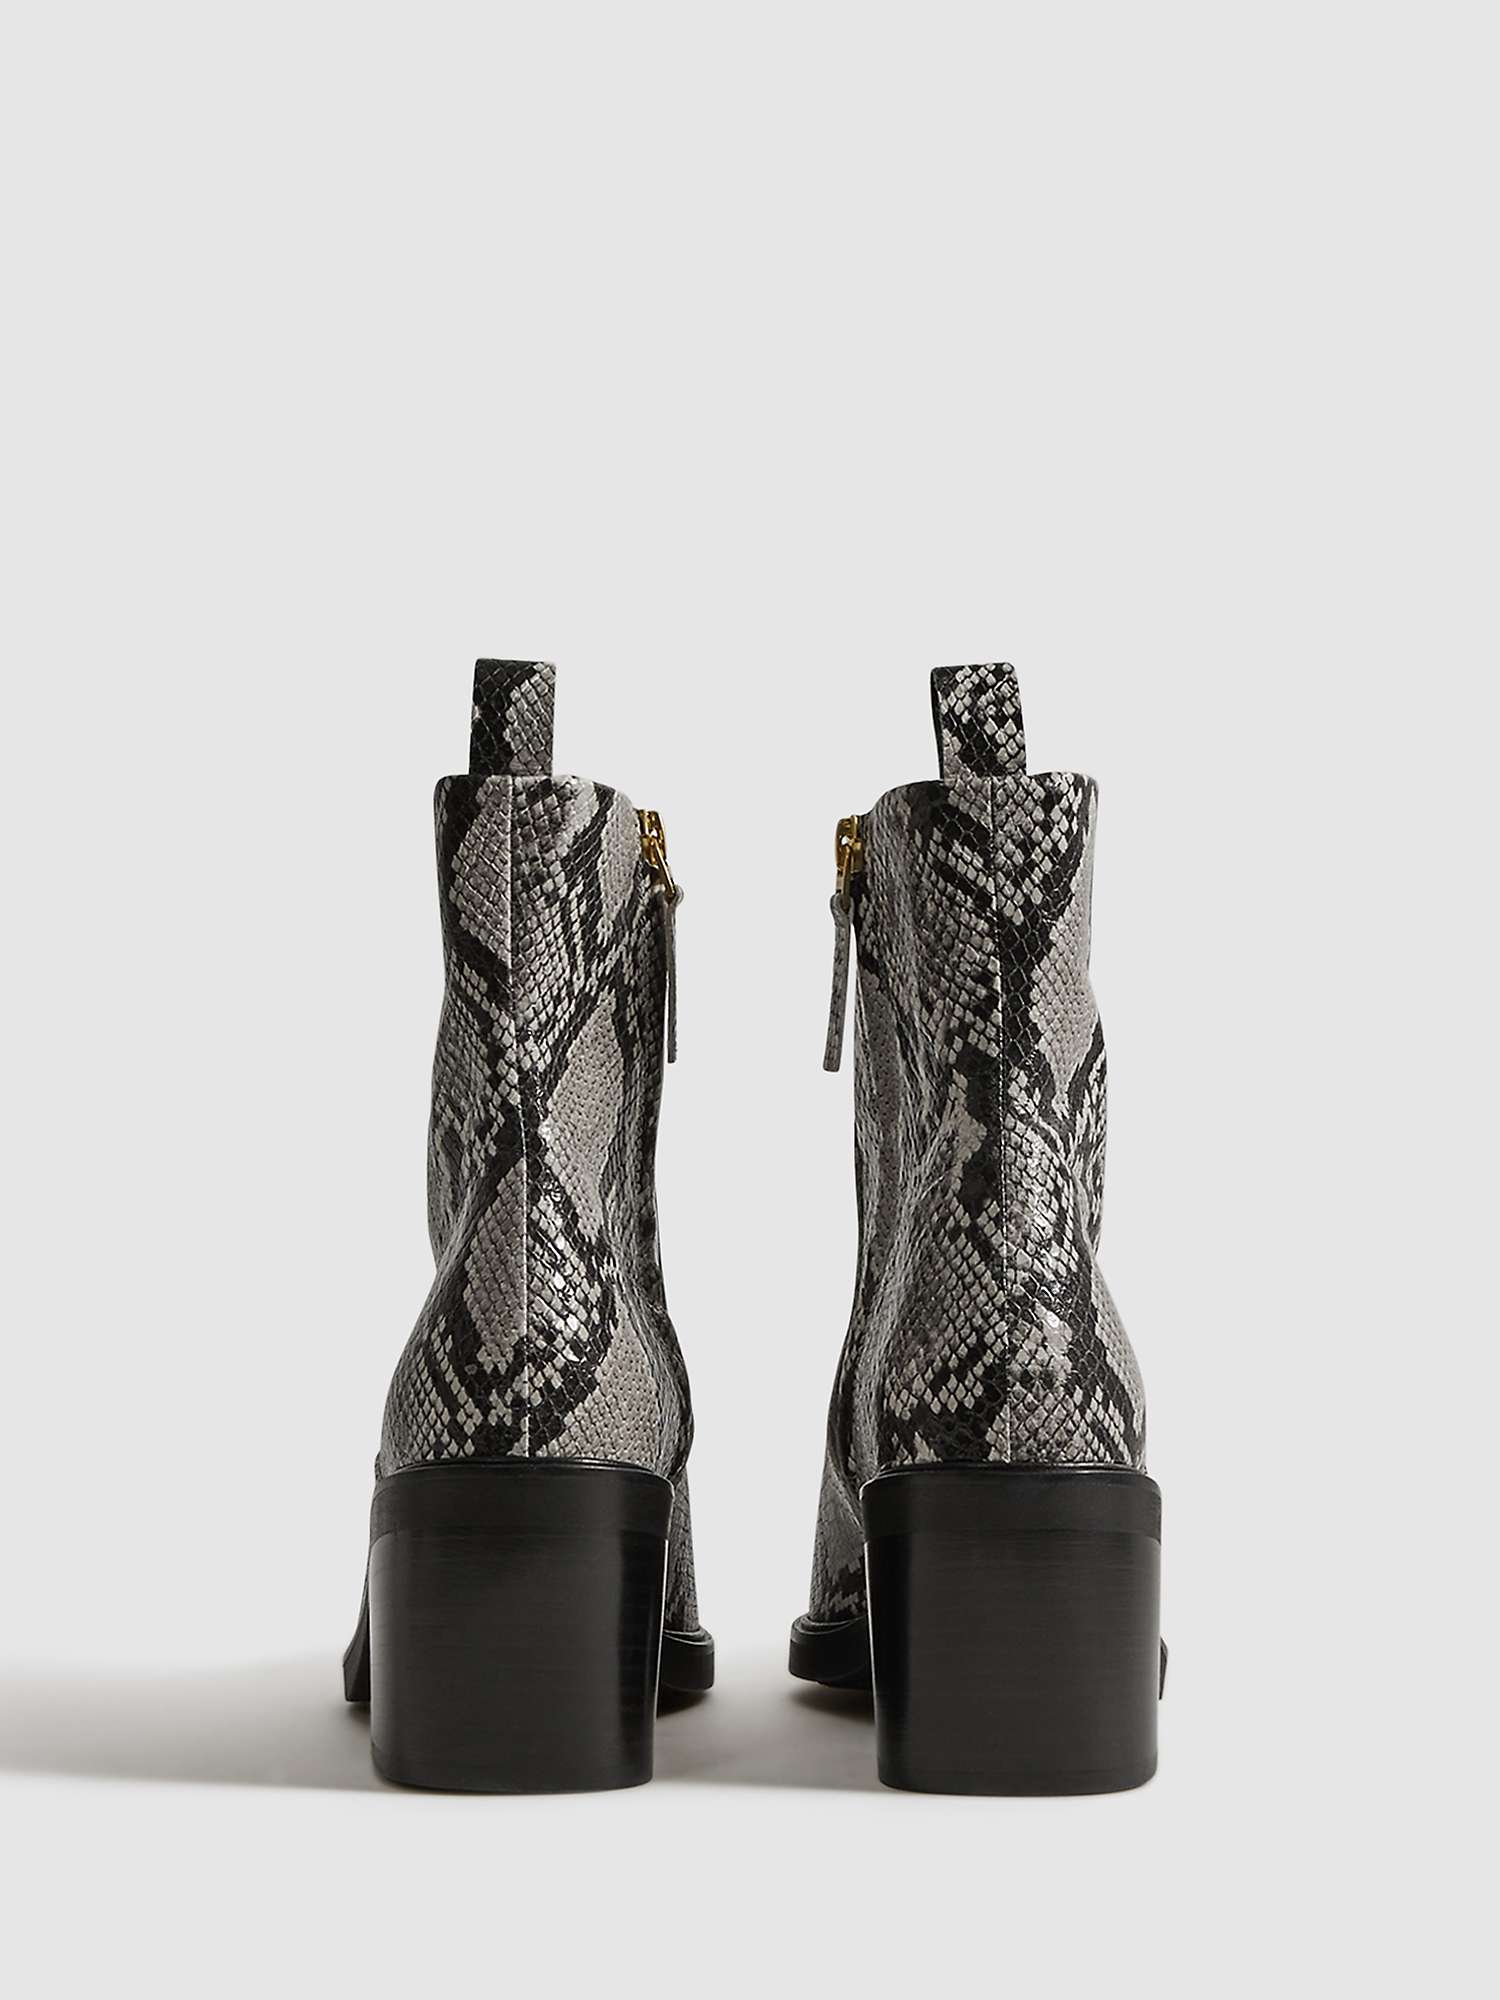 Buy Reiss Sienna Snake Print Leather Ankle Boots, Multi Online at johnlewis.com